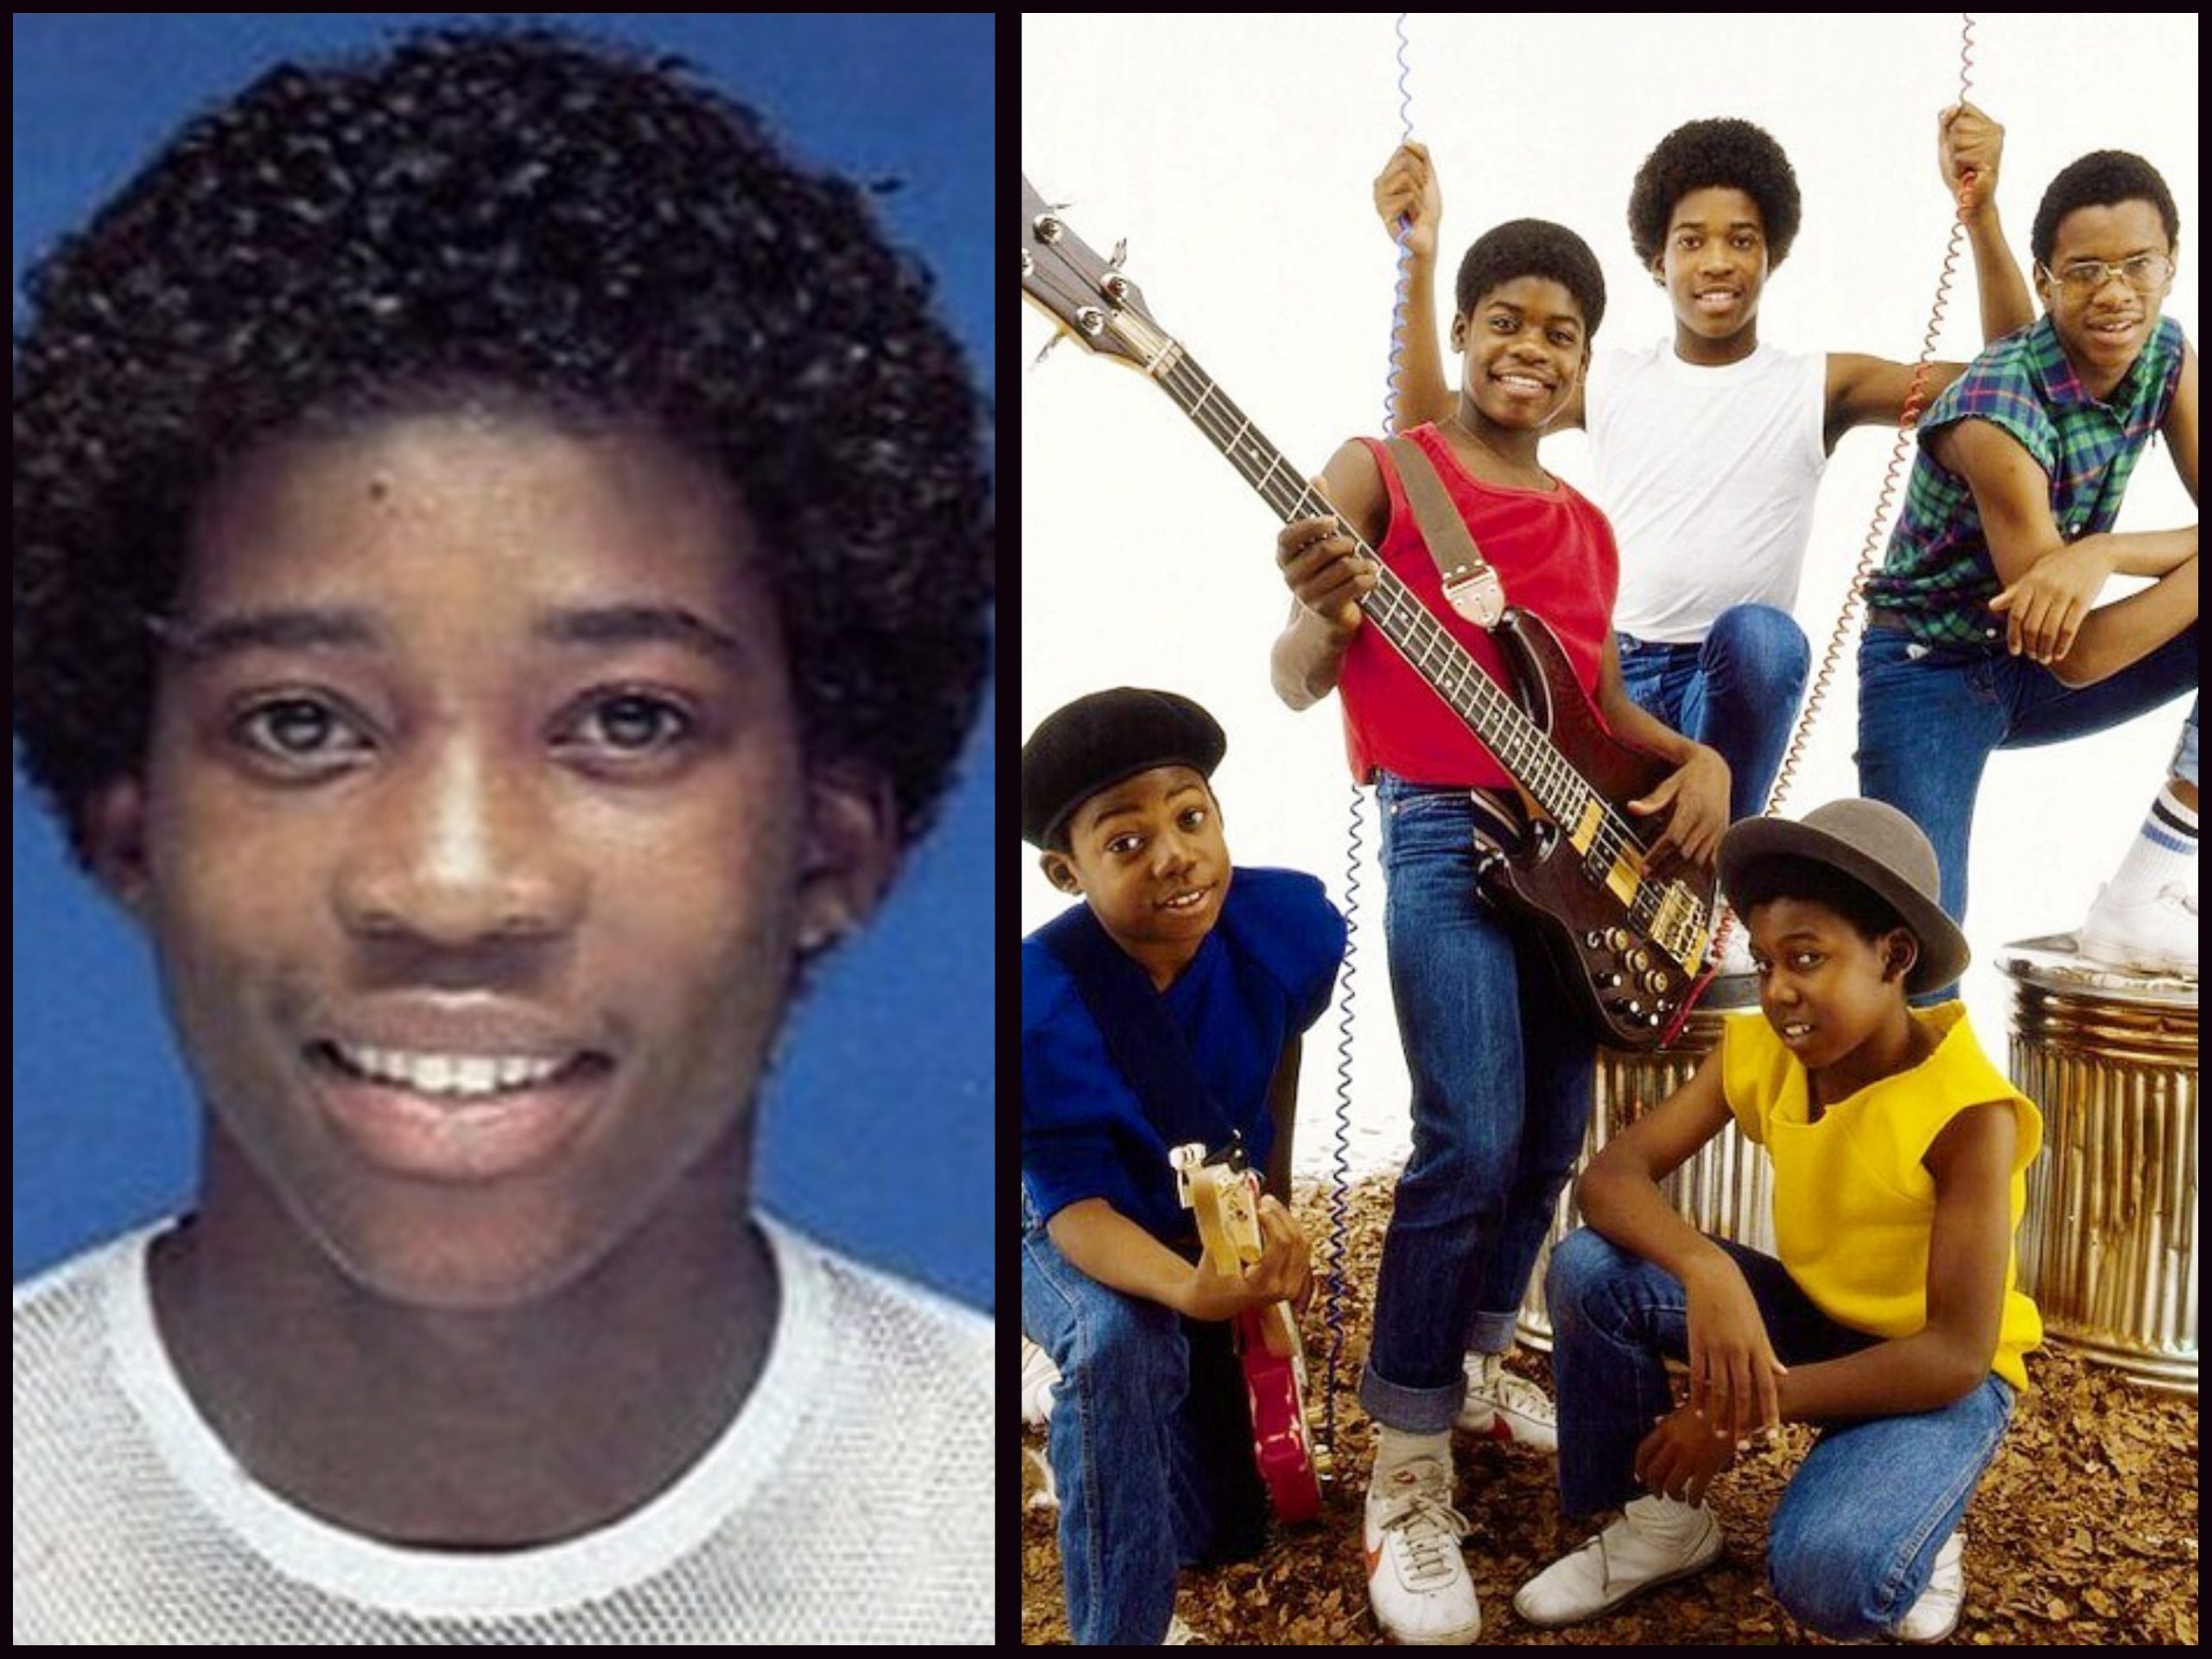 Frederick Waite, Jr. of Musical Youth Has Died At 55